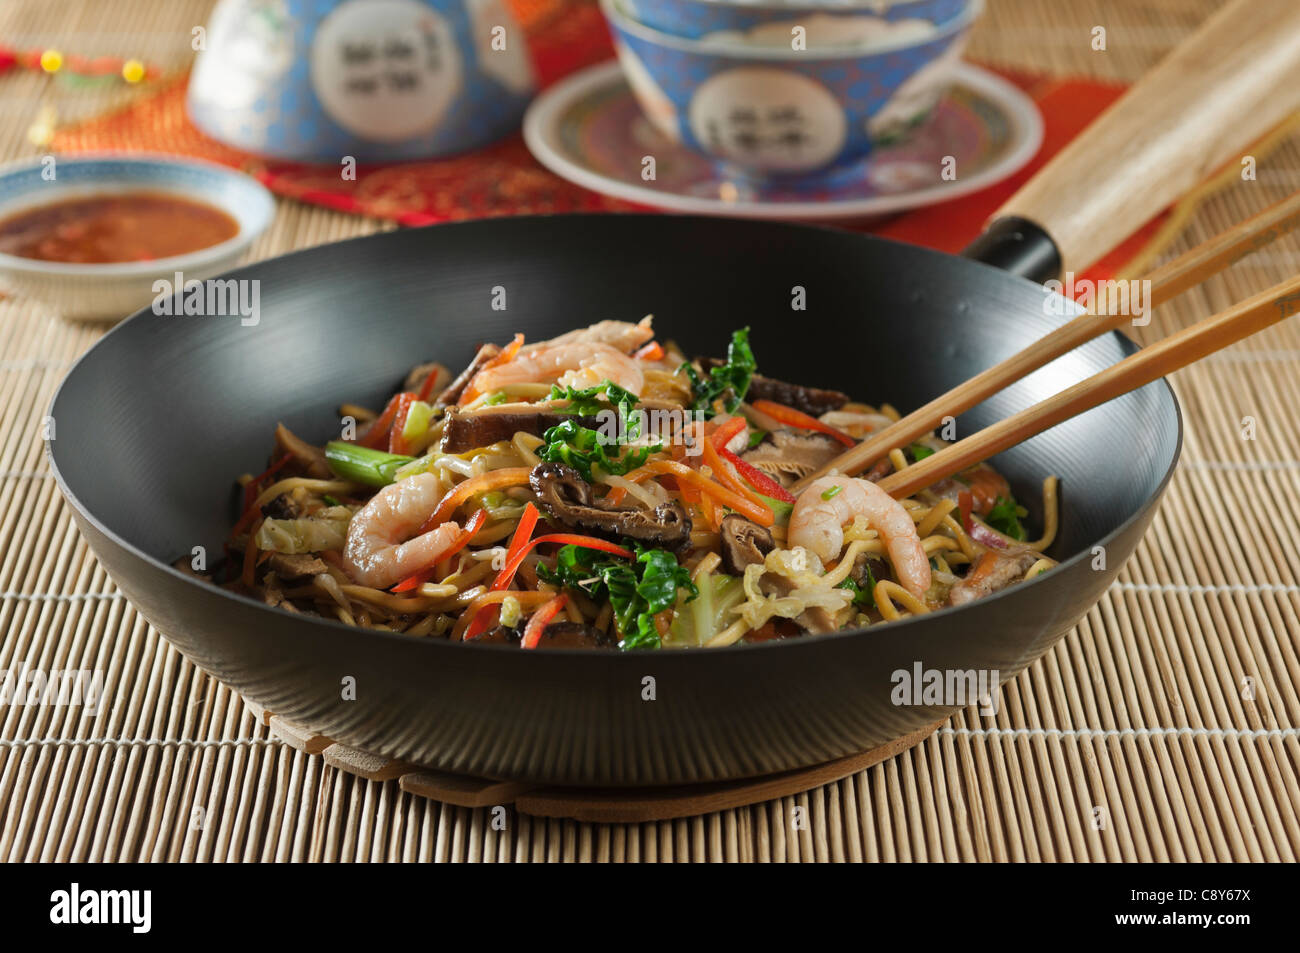 Chow mein Fried noodles Chinese food Stock Photo